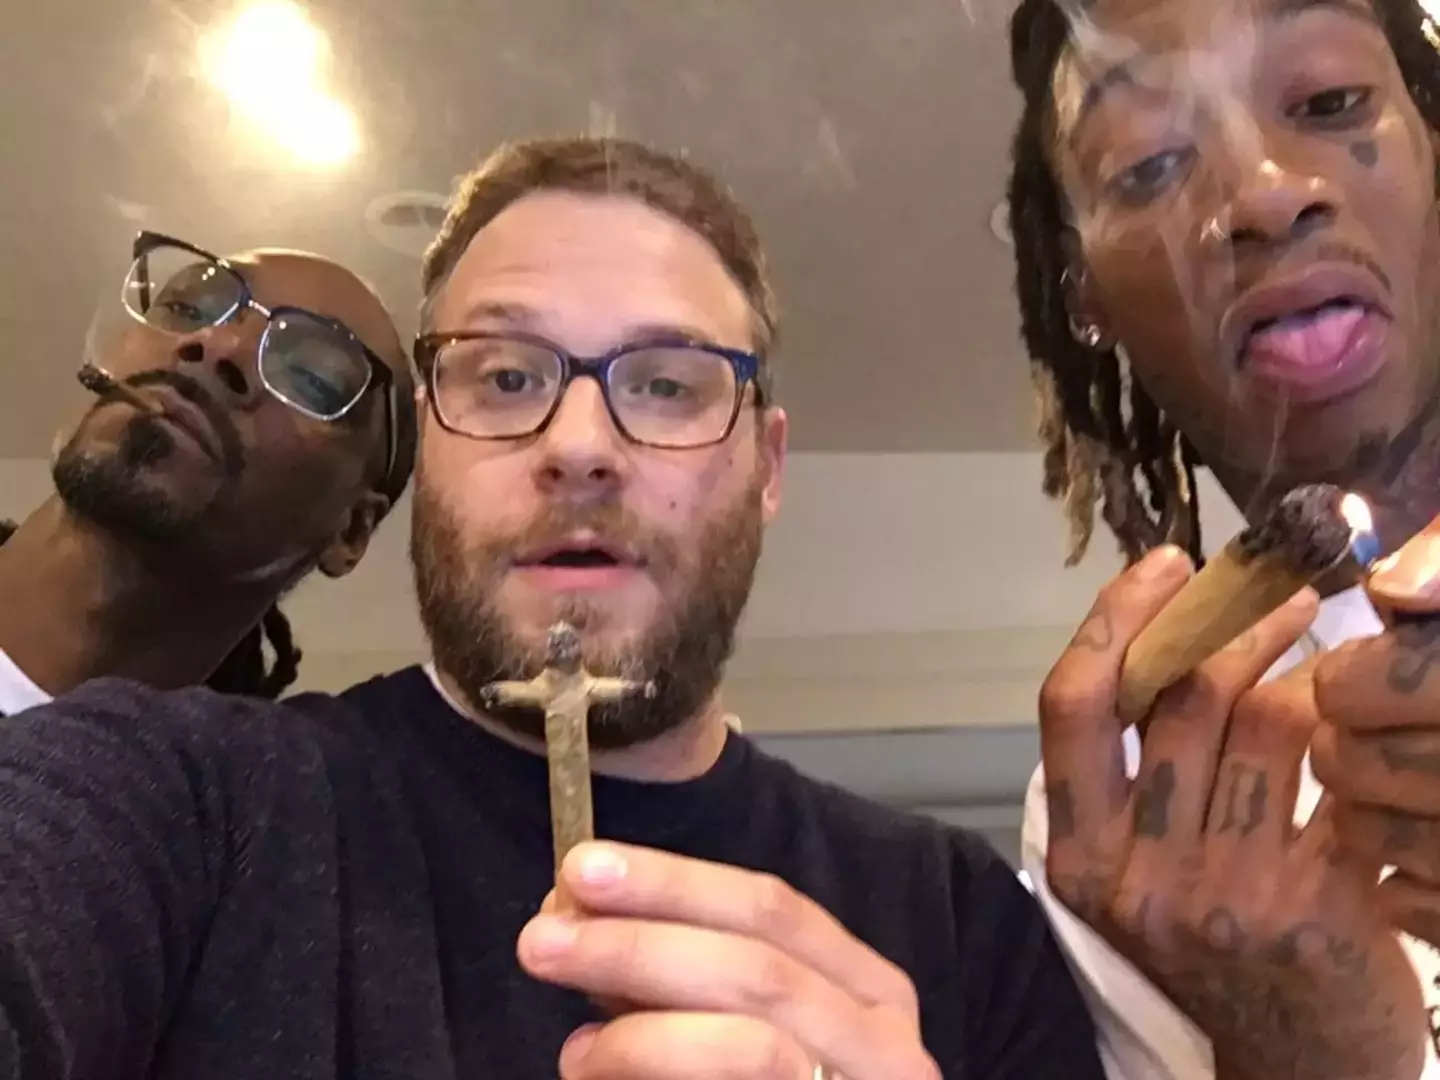 The actor has lost Snoop Dogg as a smoking partner as the rapper is giving up weed.